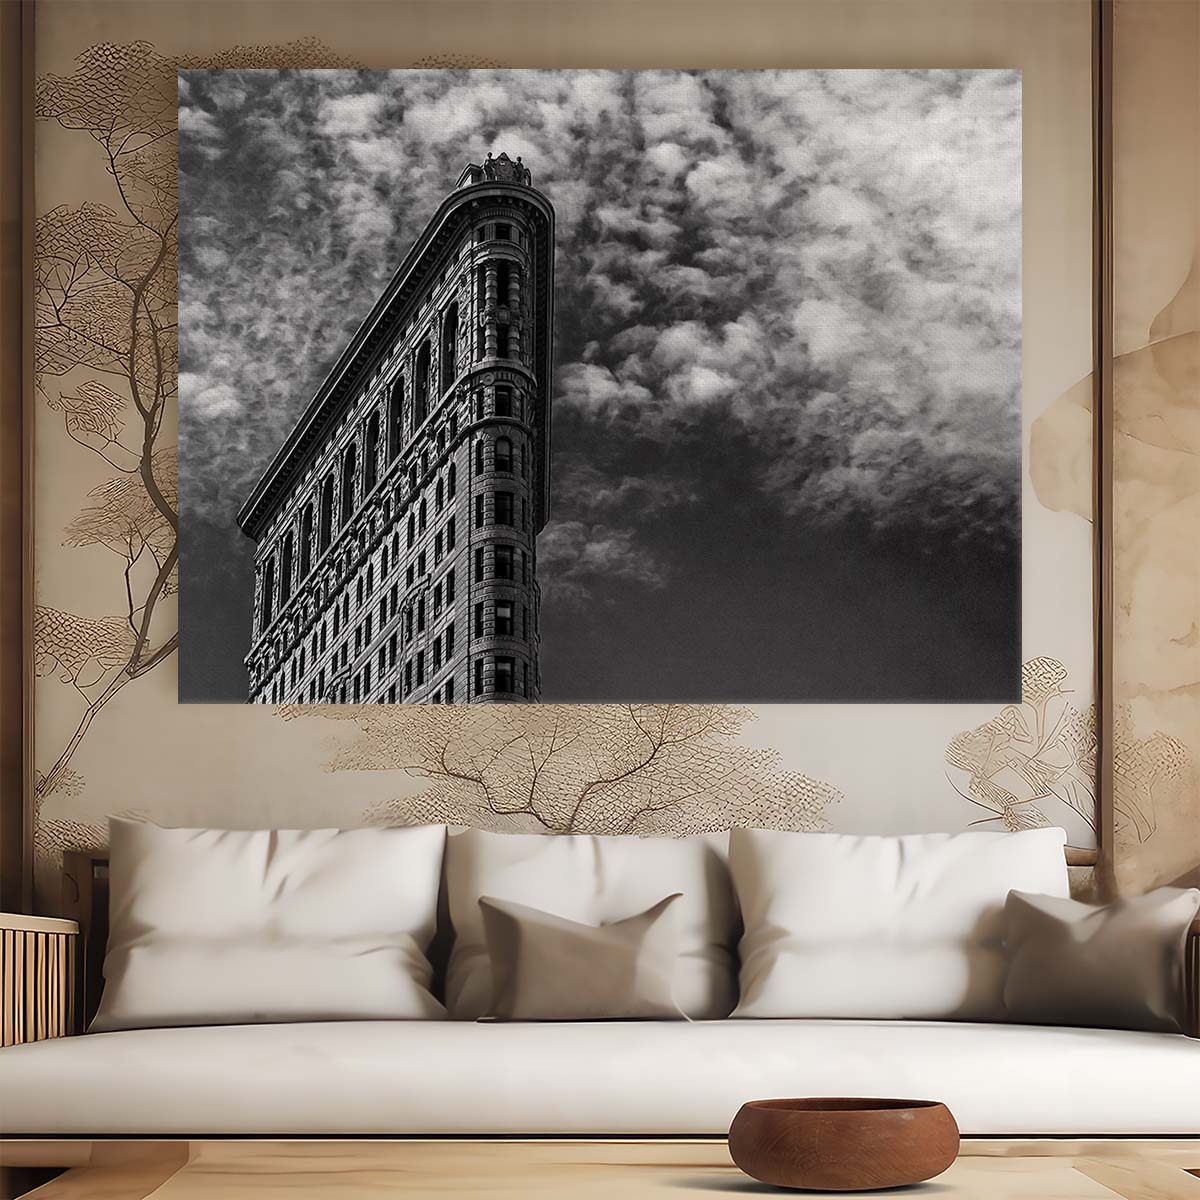 Iconic NYC Flatiron Building Monochrome Wall Art by Luxuriance Designs. Made in USA.